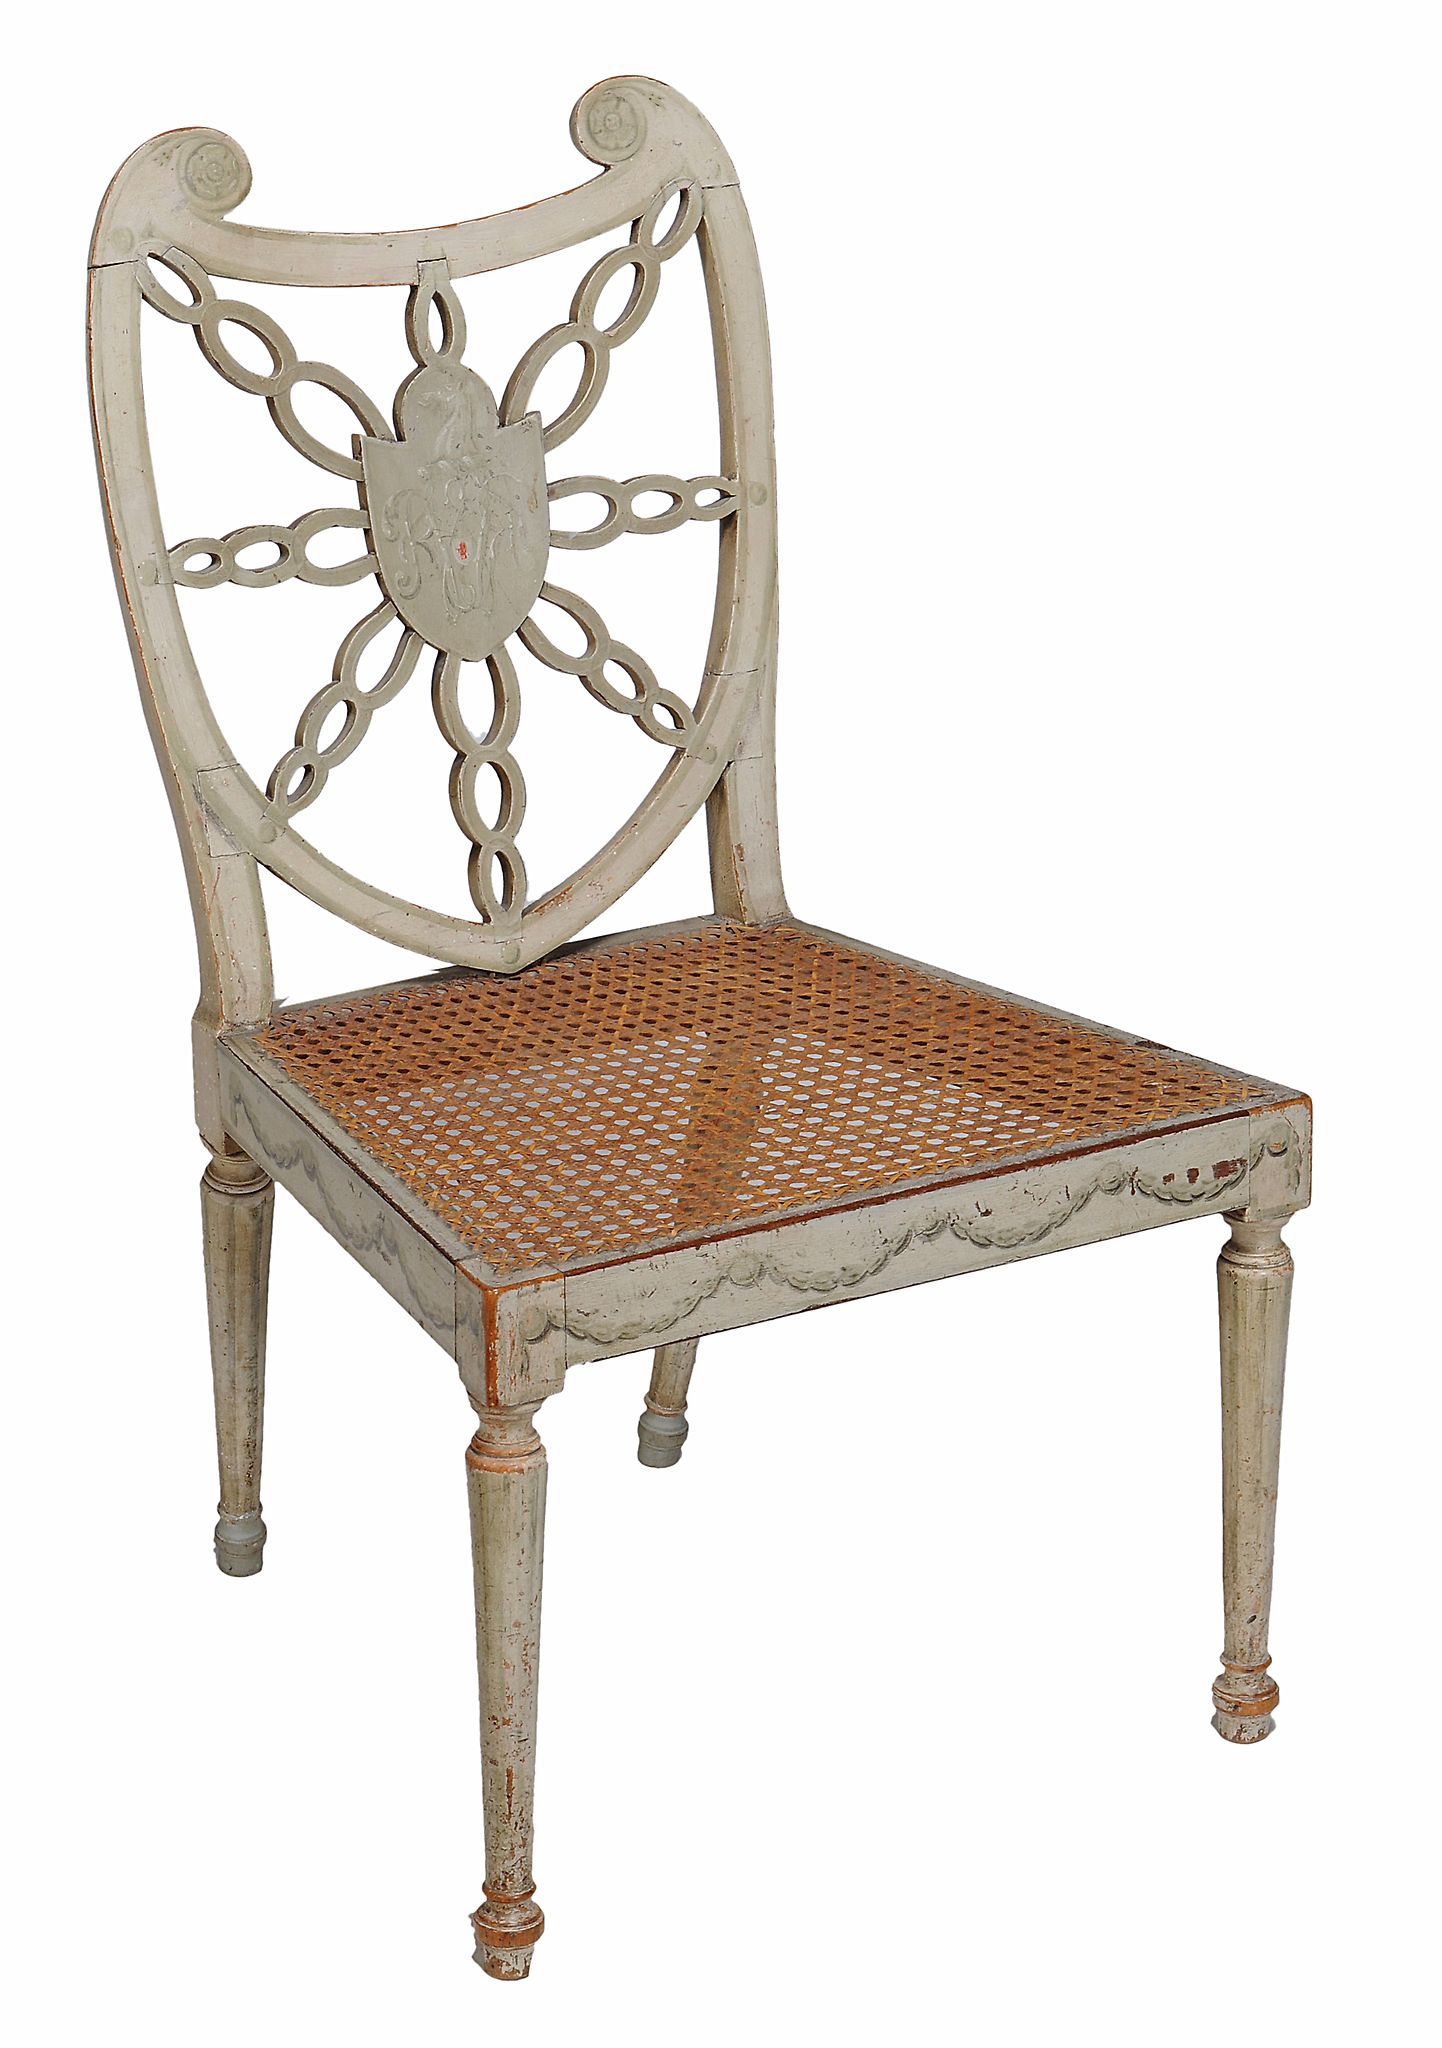 A George III painted chair, circa 1775  ,  the pierced shield shaped back with a central crest and